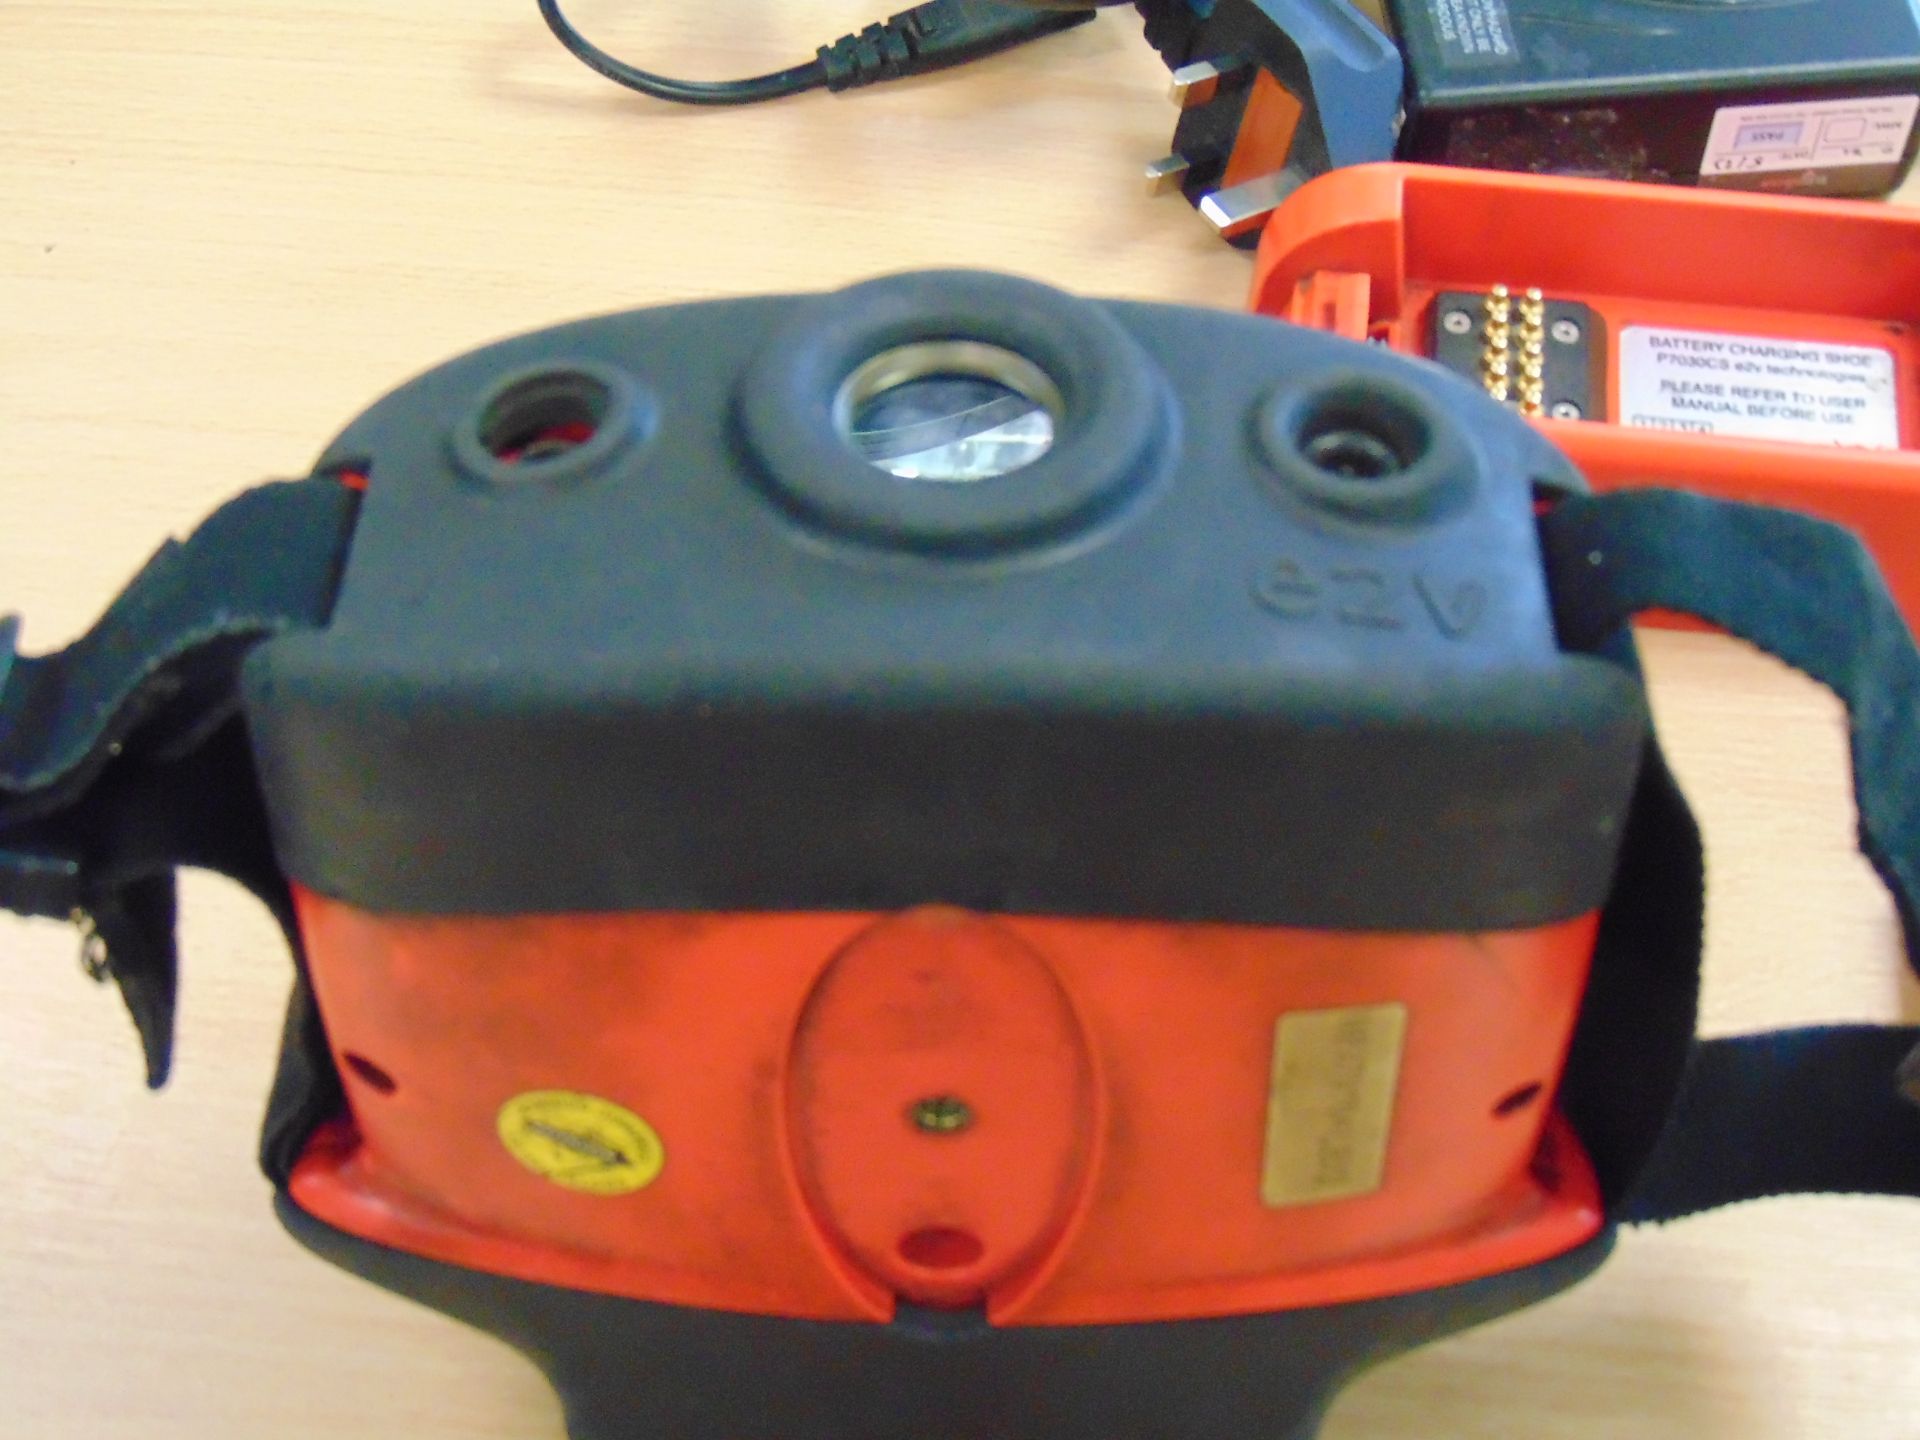 Argus 4 E2V Thermal Imaging Camera & Battery Charger - Image 8 of 11